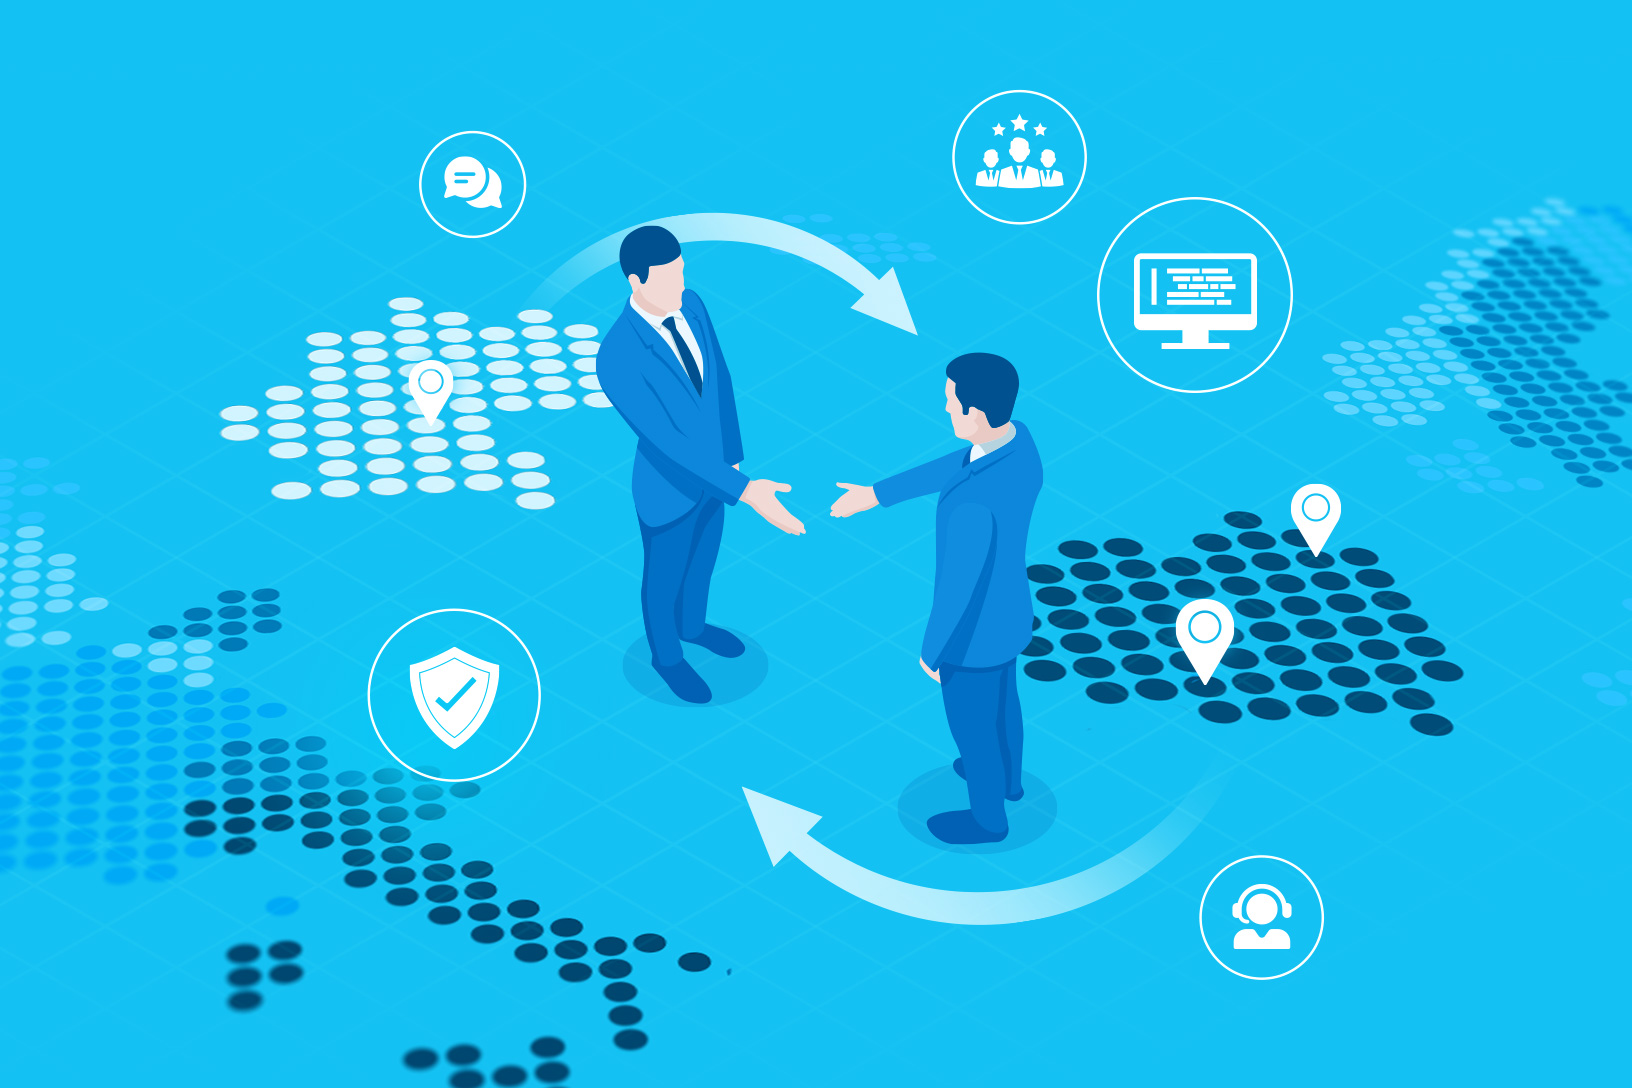 Tips on how to build a successful partnership with a nearshoring partner